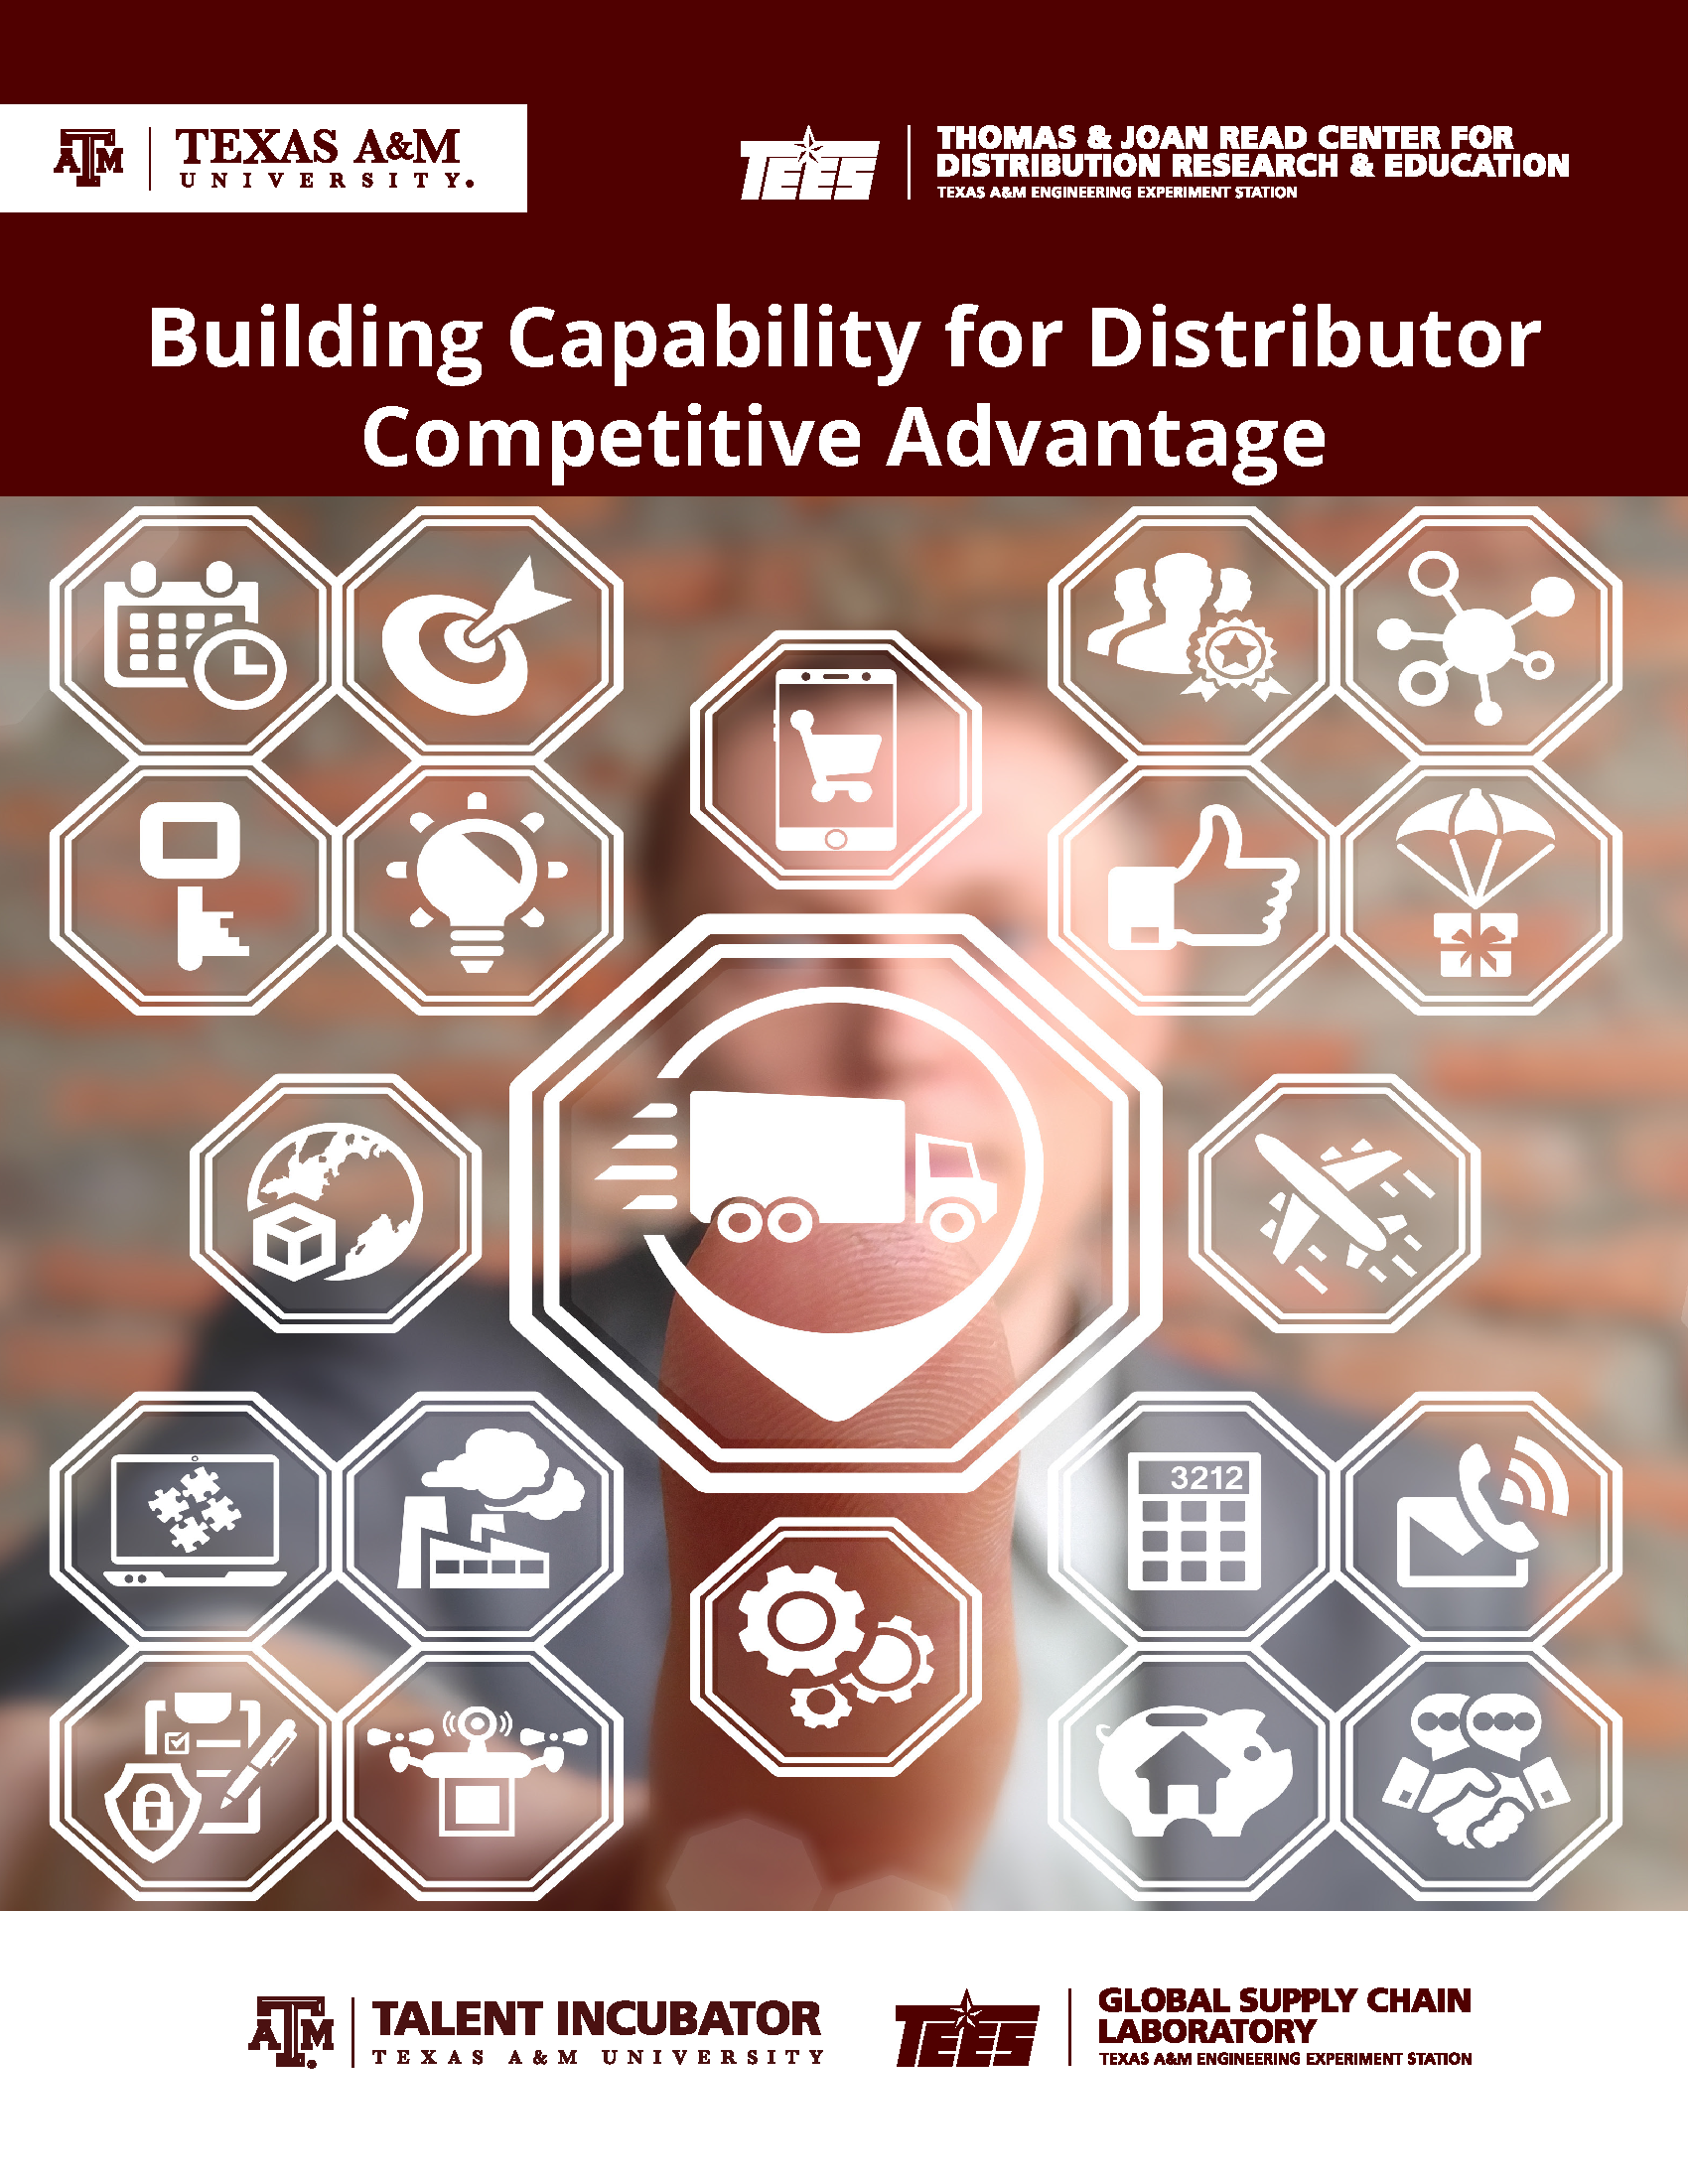 Building Capability for Distributor Competitive Advantage